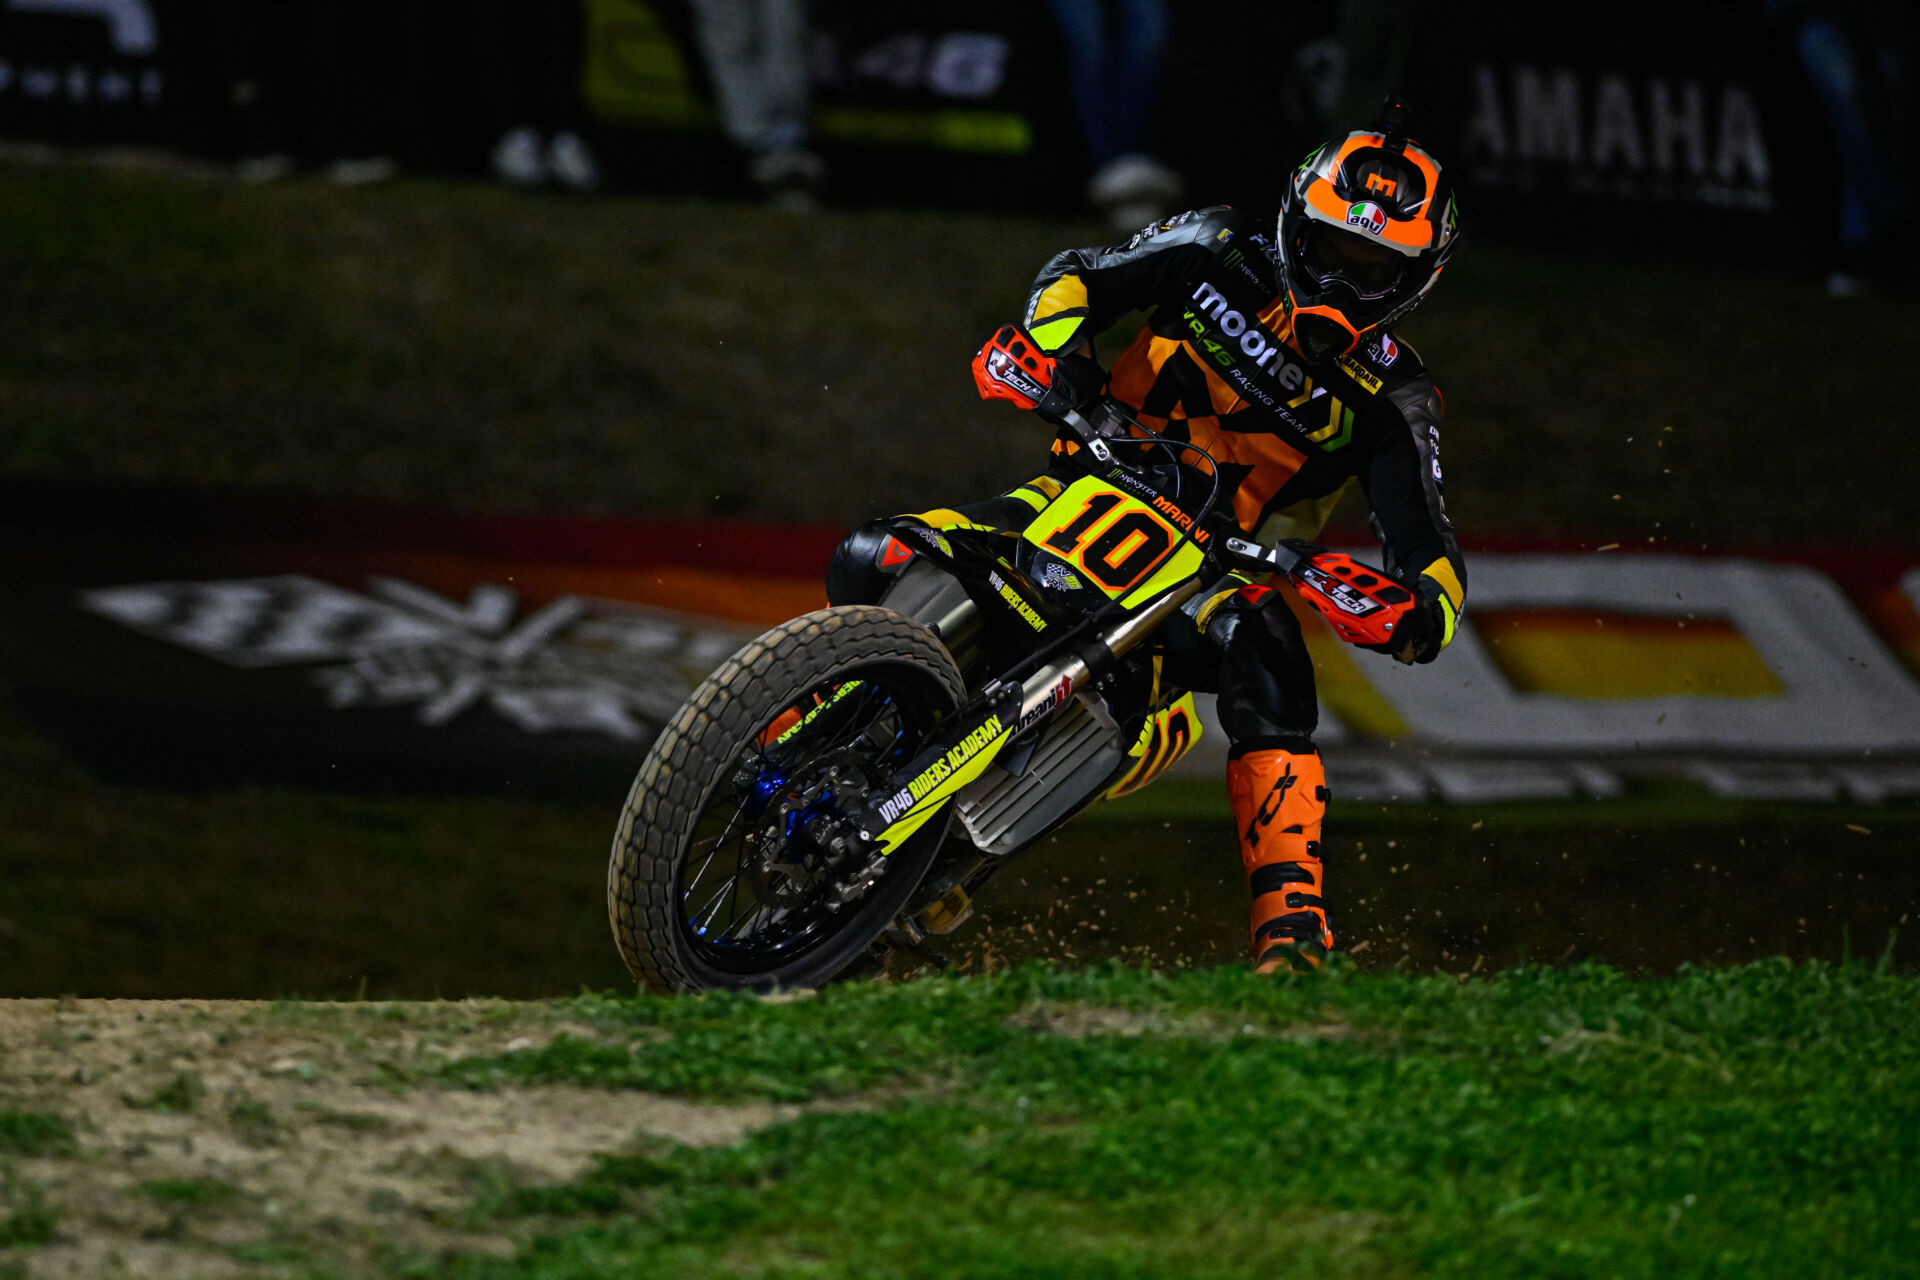 Luca Marini (10) in action at the VR46 Motor Ranch. Photo courtesy VR46 Racing.